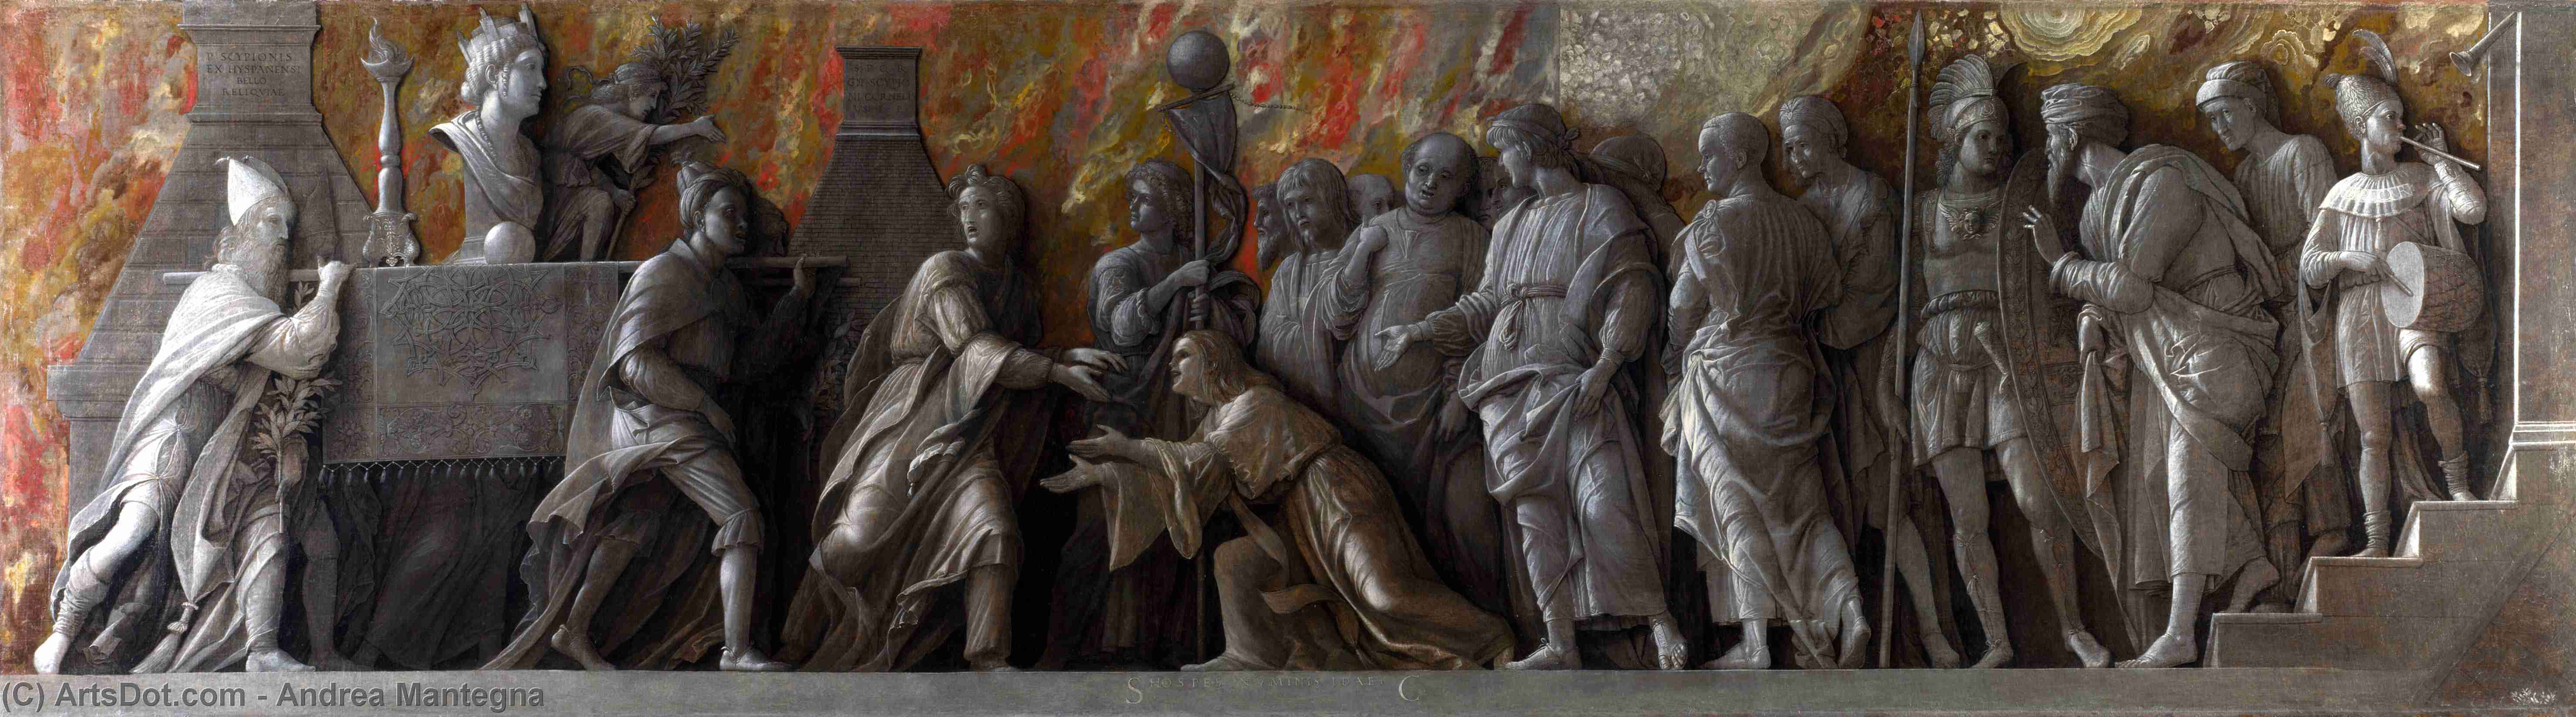 WikiOO.org - 백과 사전 - 회화, 삽화 Andrea Mantegna - The Introduction of the Cult of Cybele at Rome